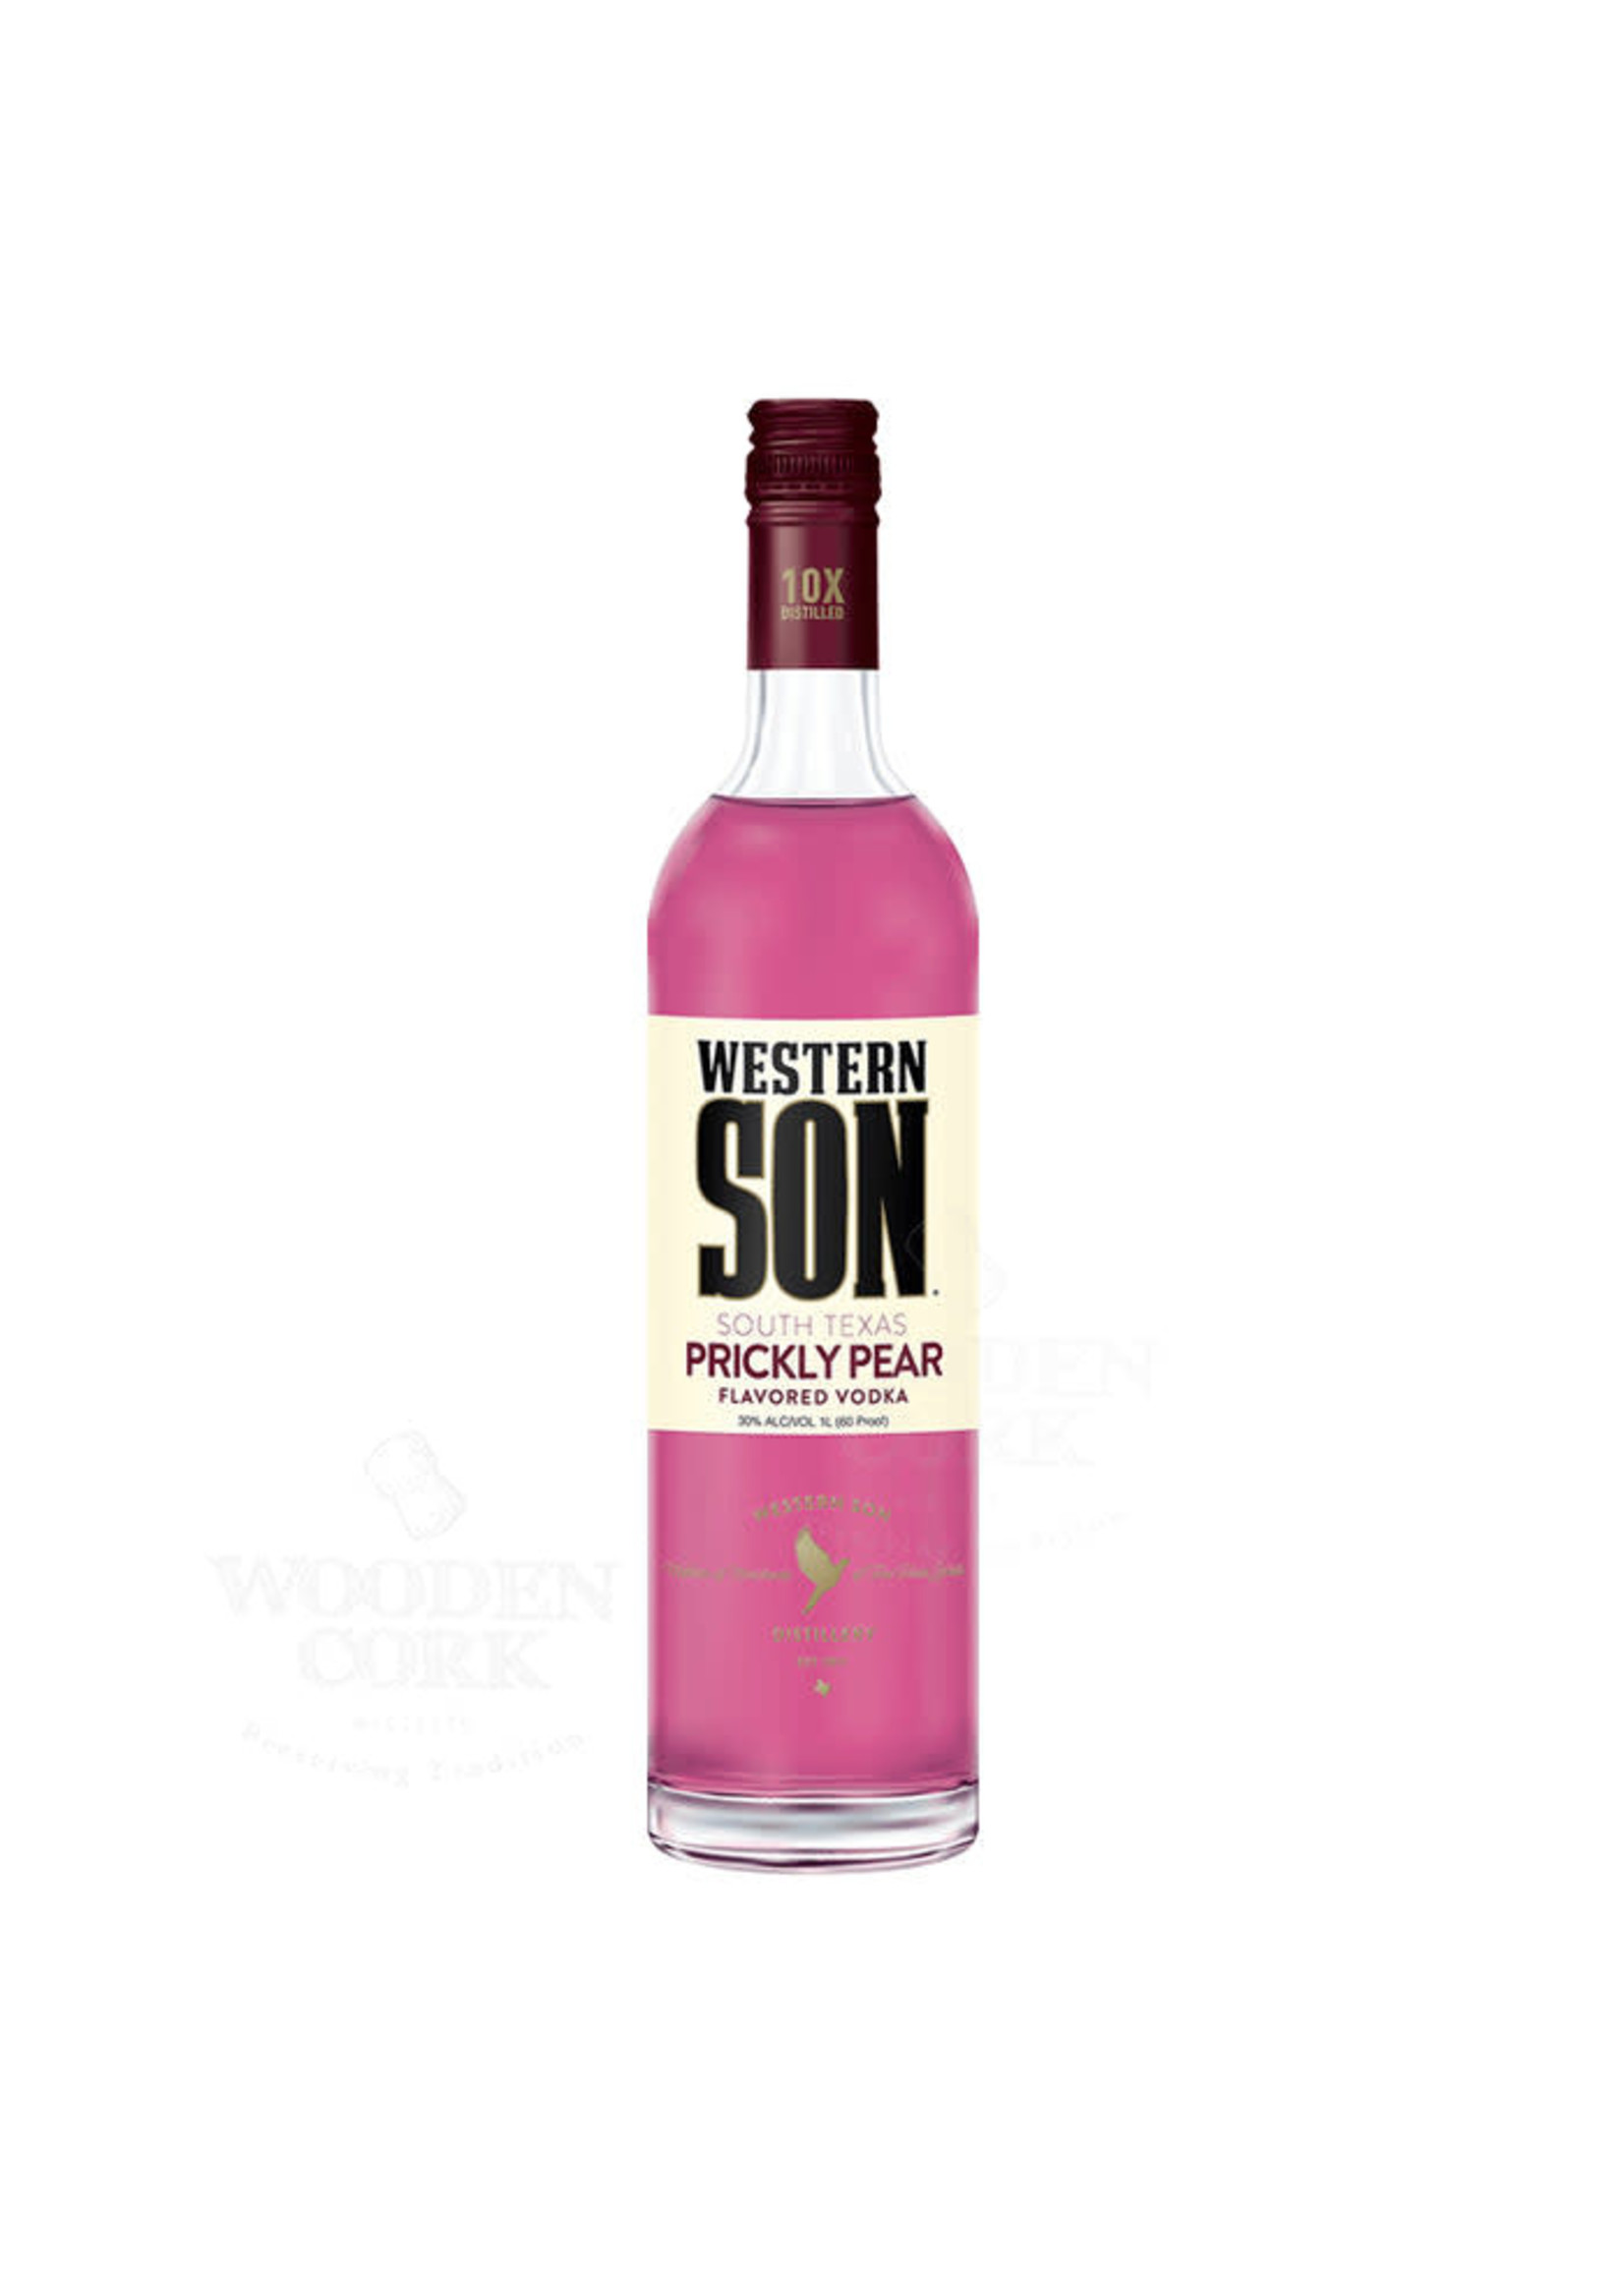 Western Son Western Son Prickly Pear Flavored Vodka 60Proof 375ml